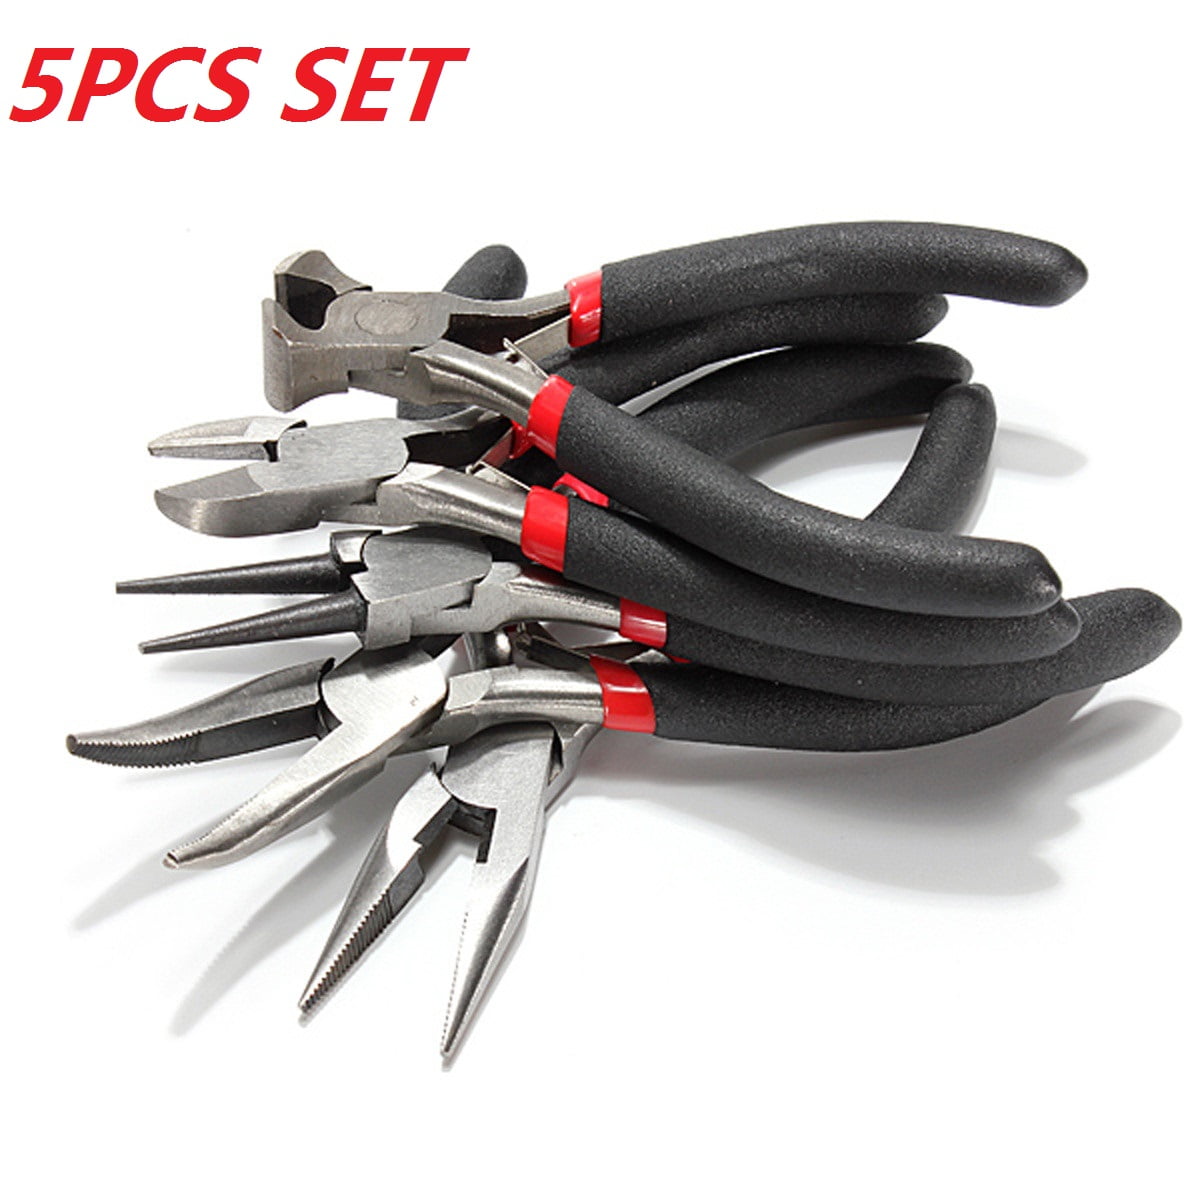 5PC JEWELERS PLIERS SET JEWELRY MAKING BEADING WIRE WRAPPING HOBBY 5" PLIER KIT 